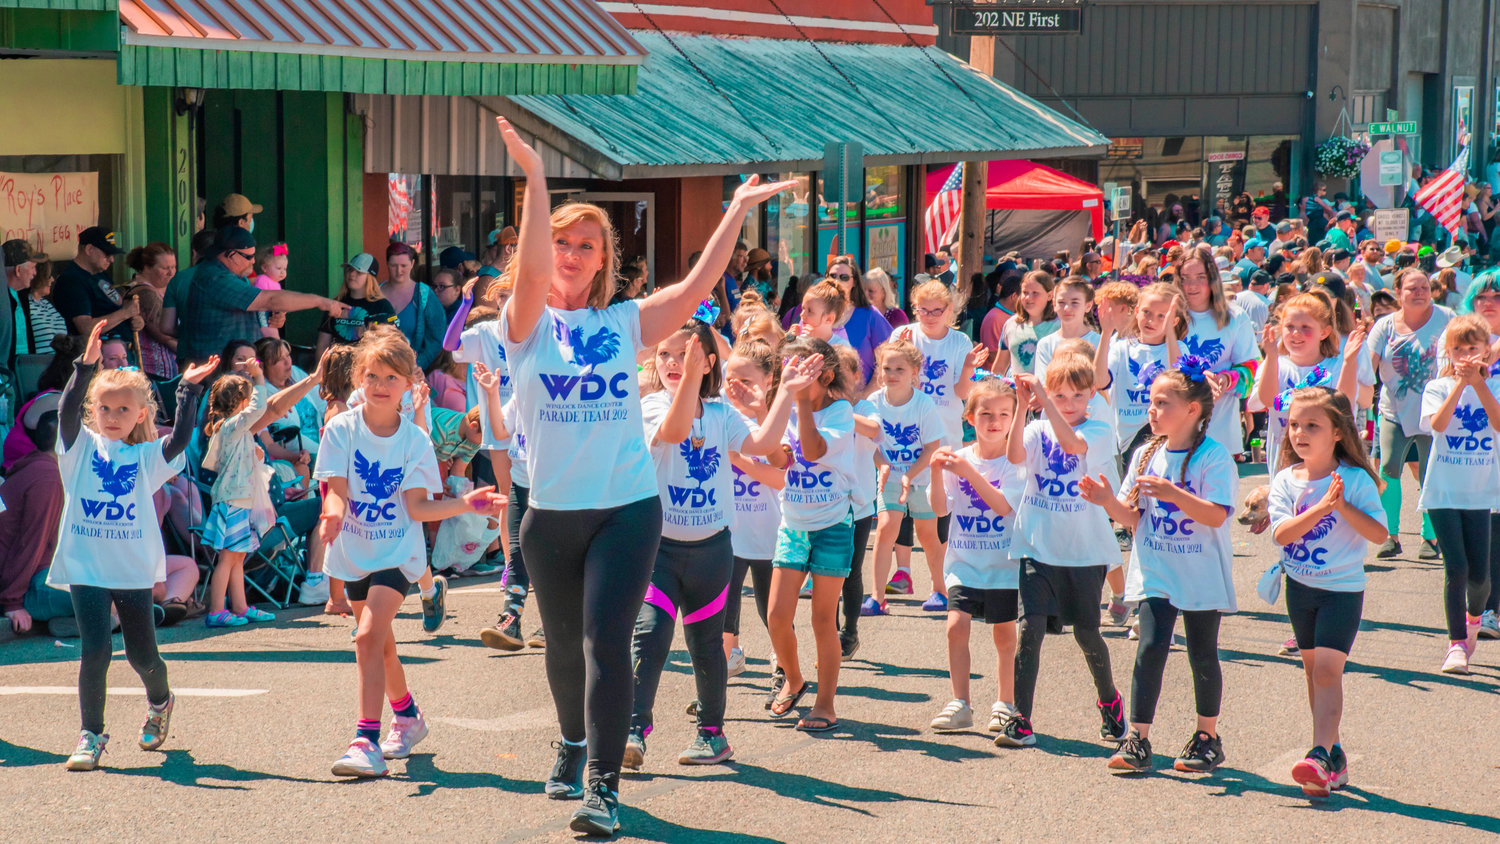 Members of the Winlock Dance Center Parade Team dance through the streets during the Winlock Egg Days parade on Saturday.